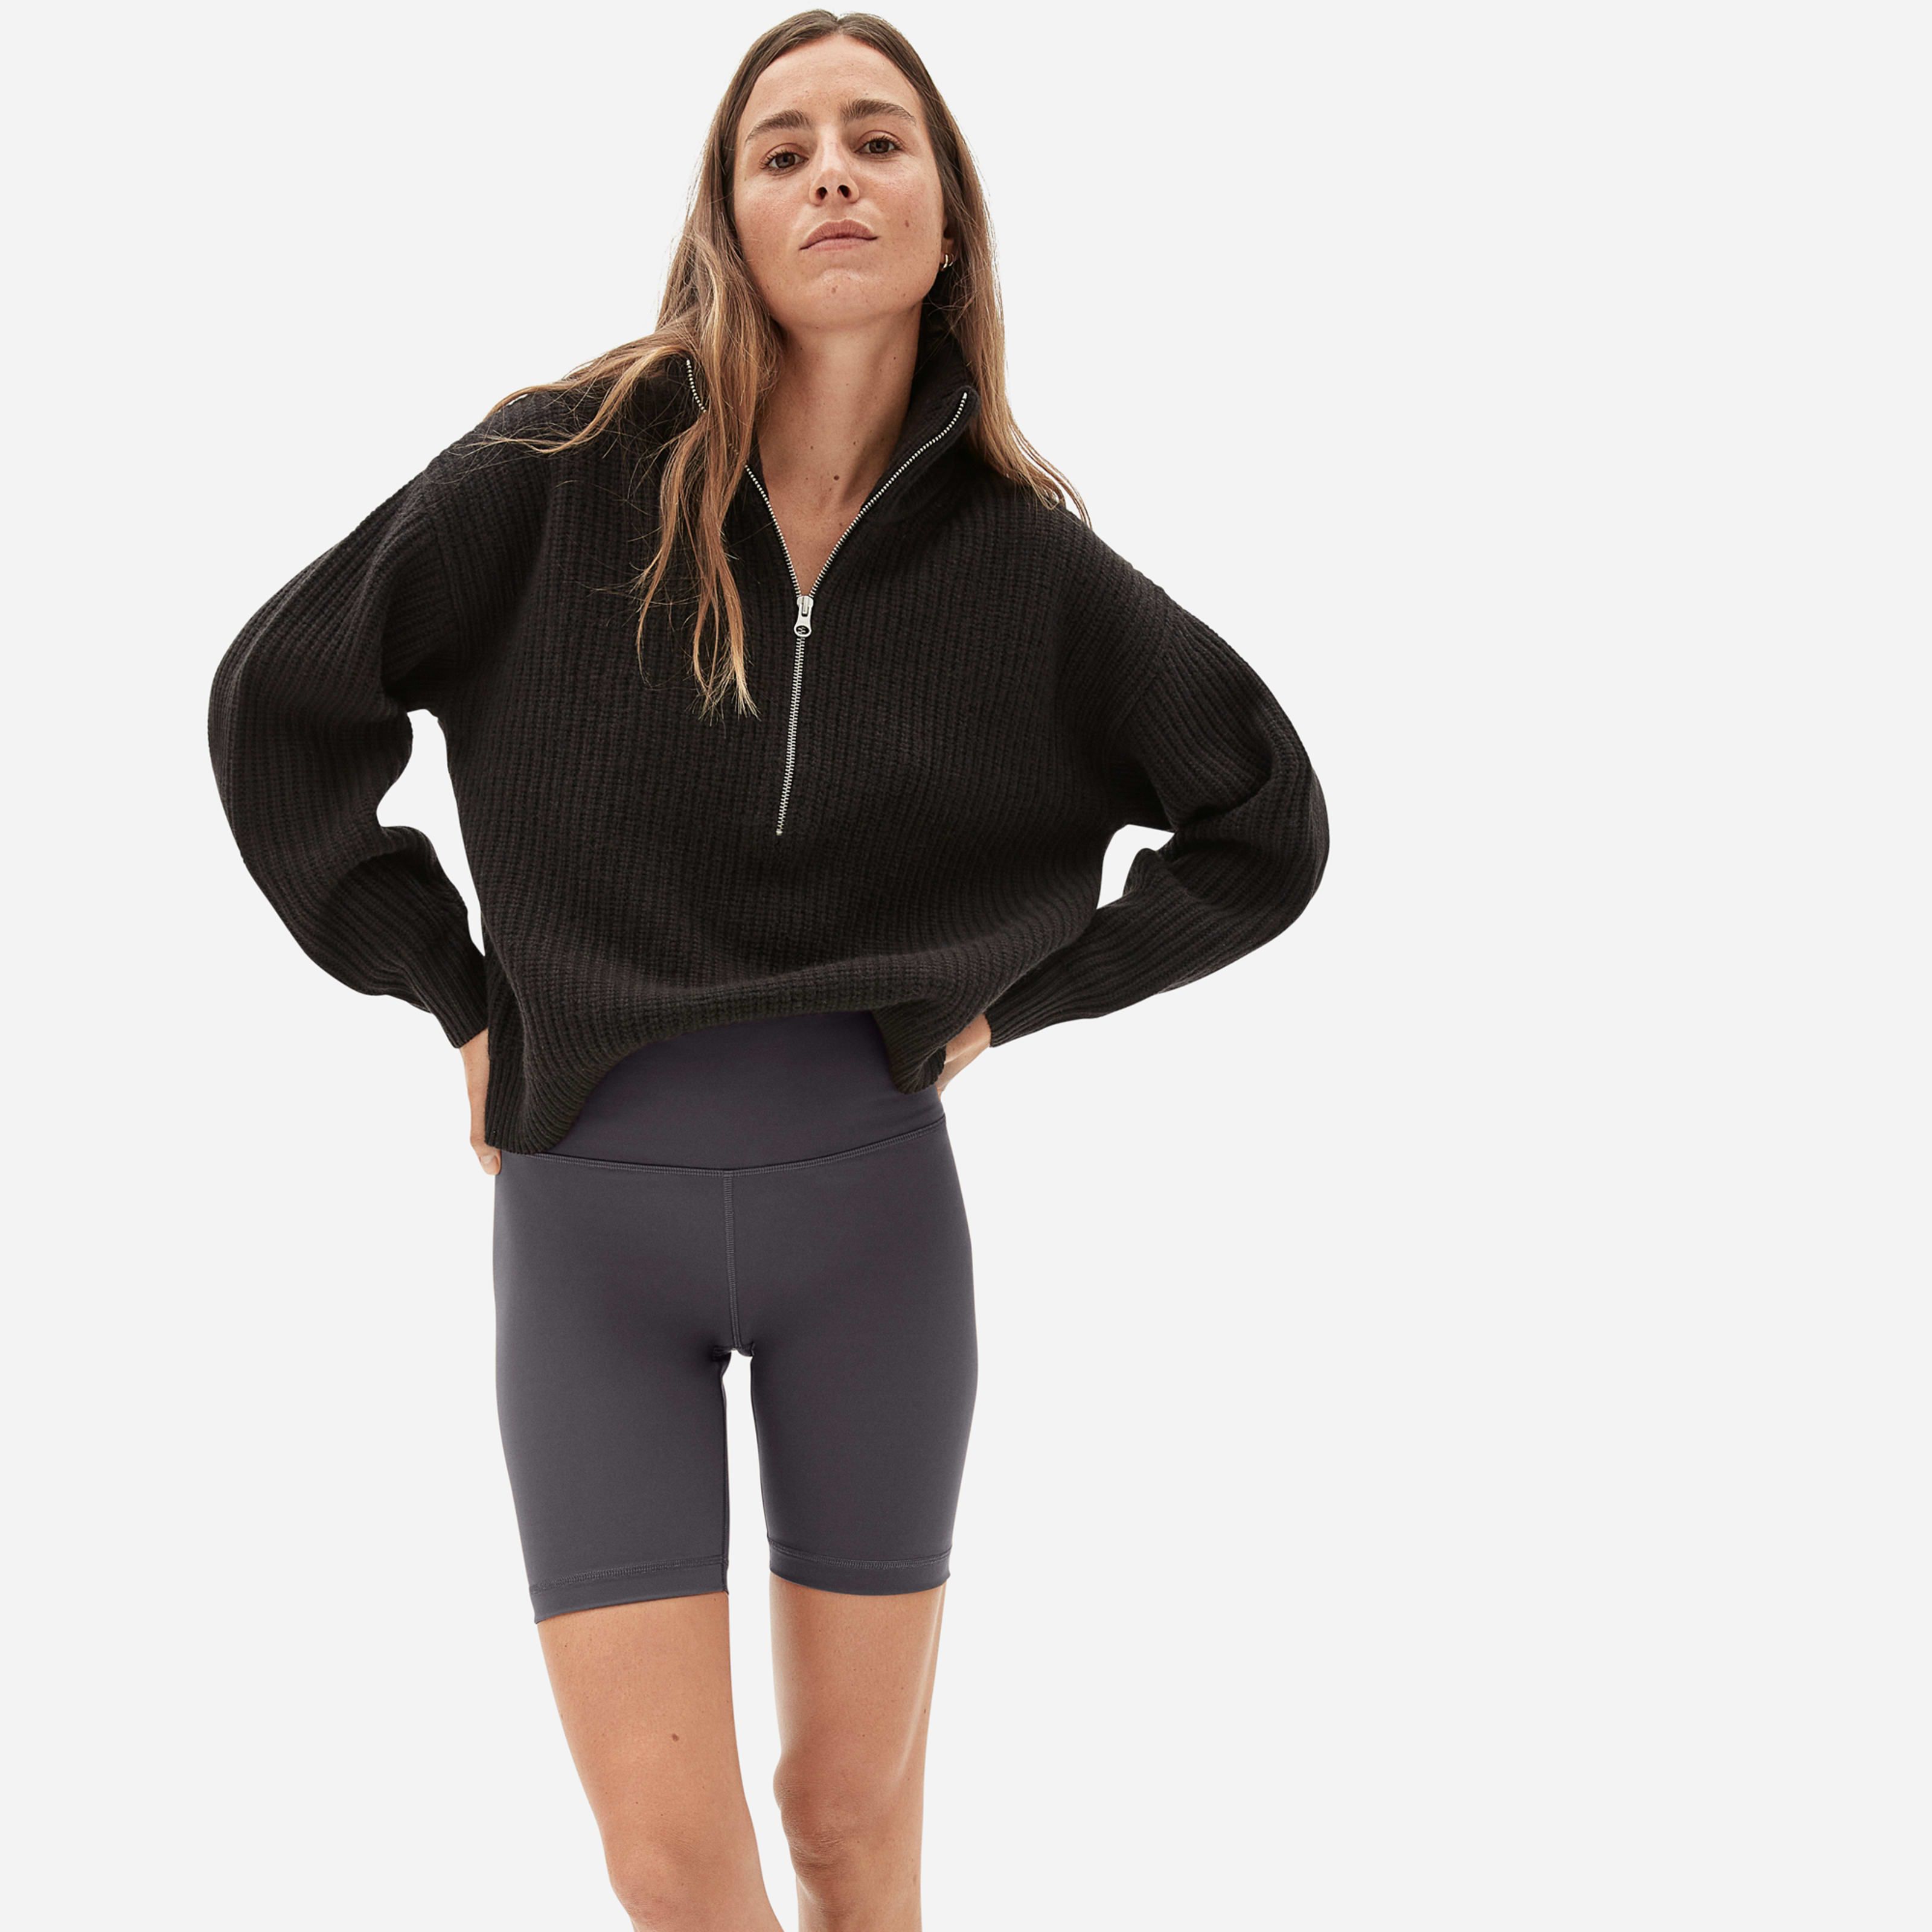 Women's Perform Bike Short by Everlane in Ink Grey, Size L | Everlane